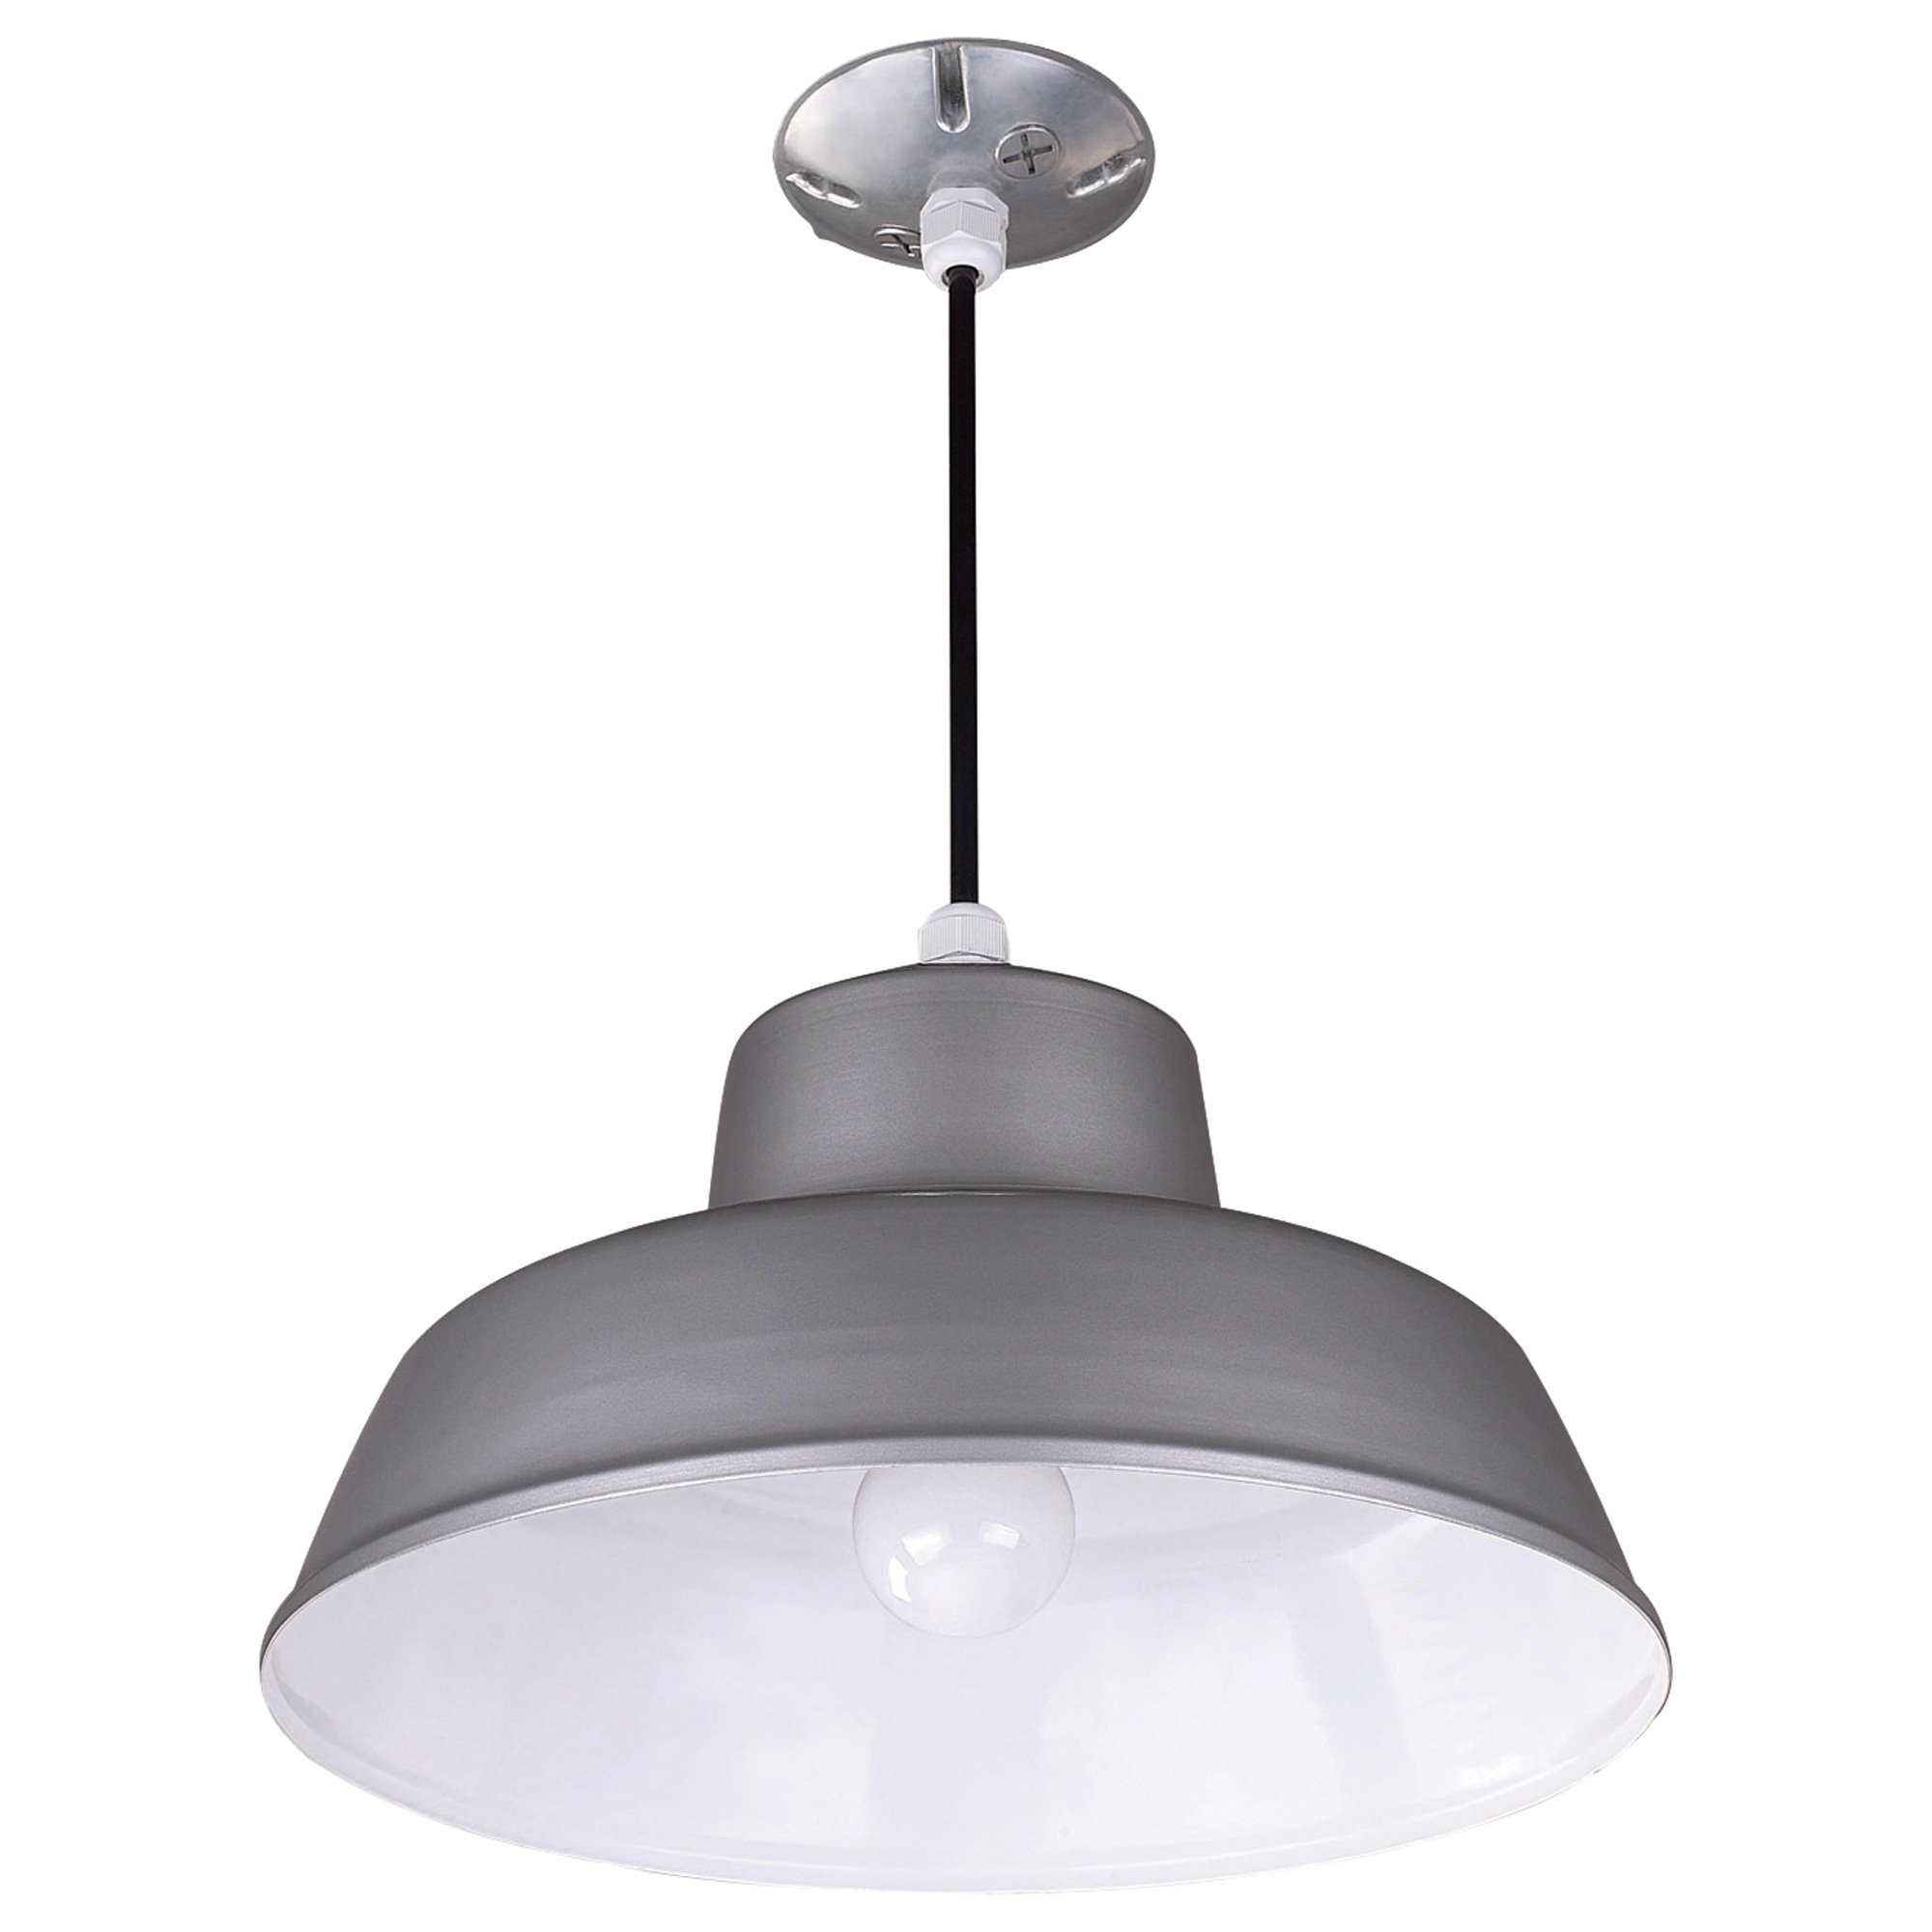 Hang Light Fixture For Suspended Ceiling